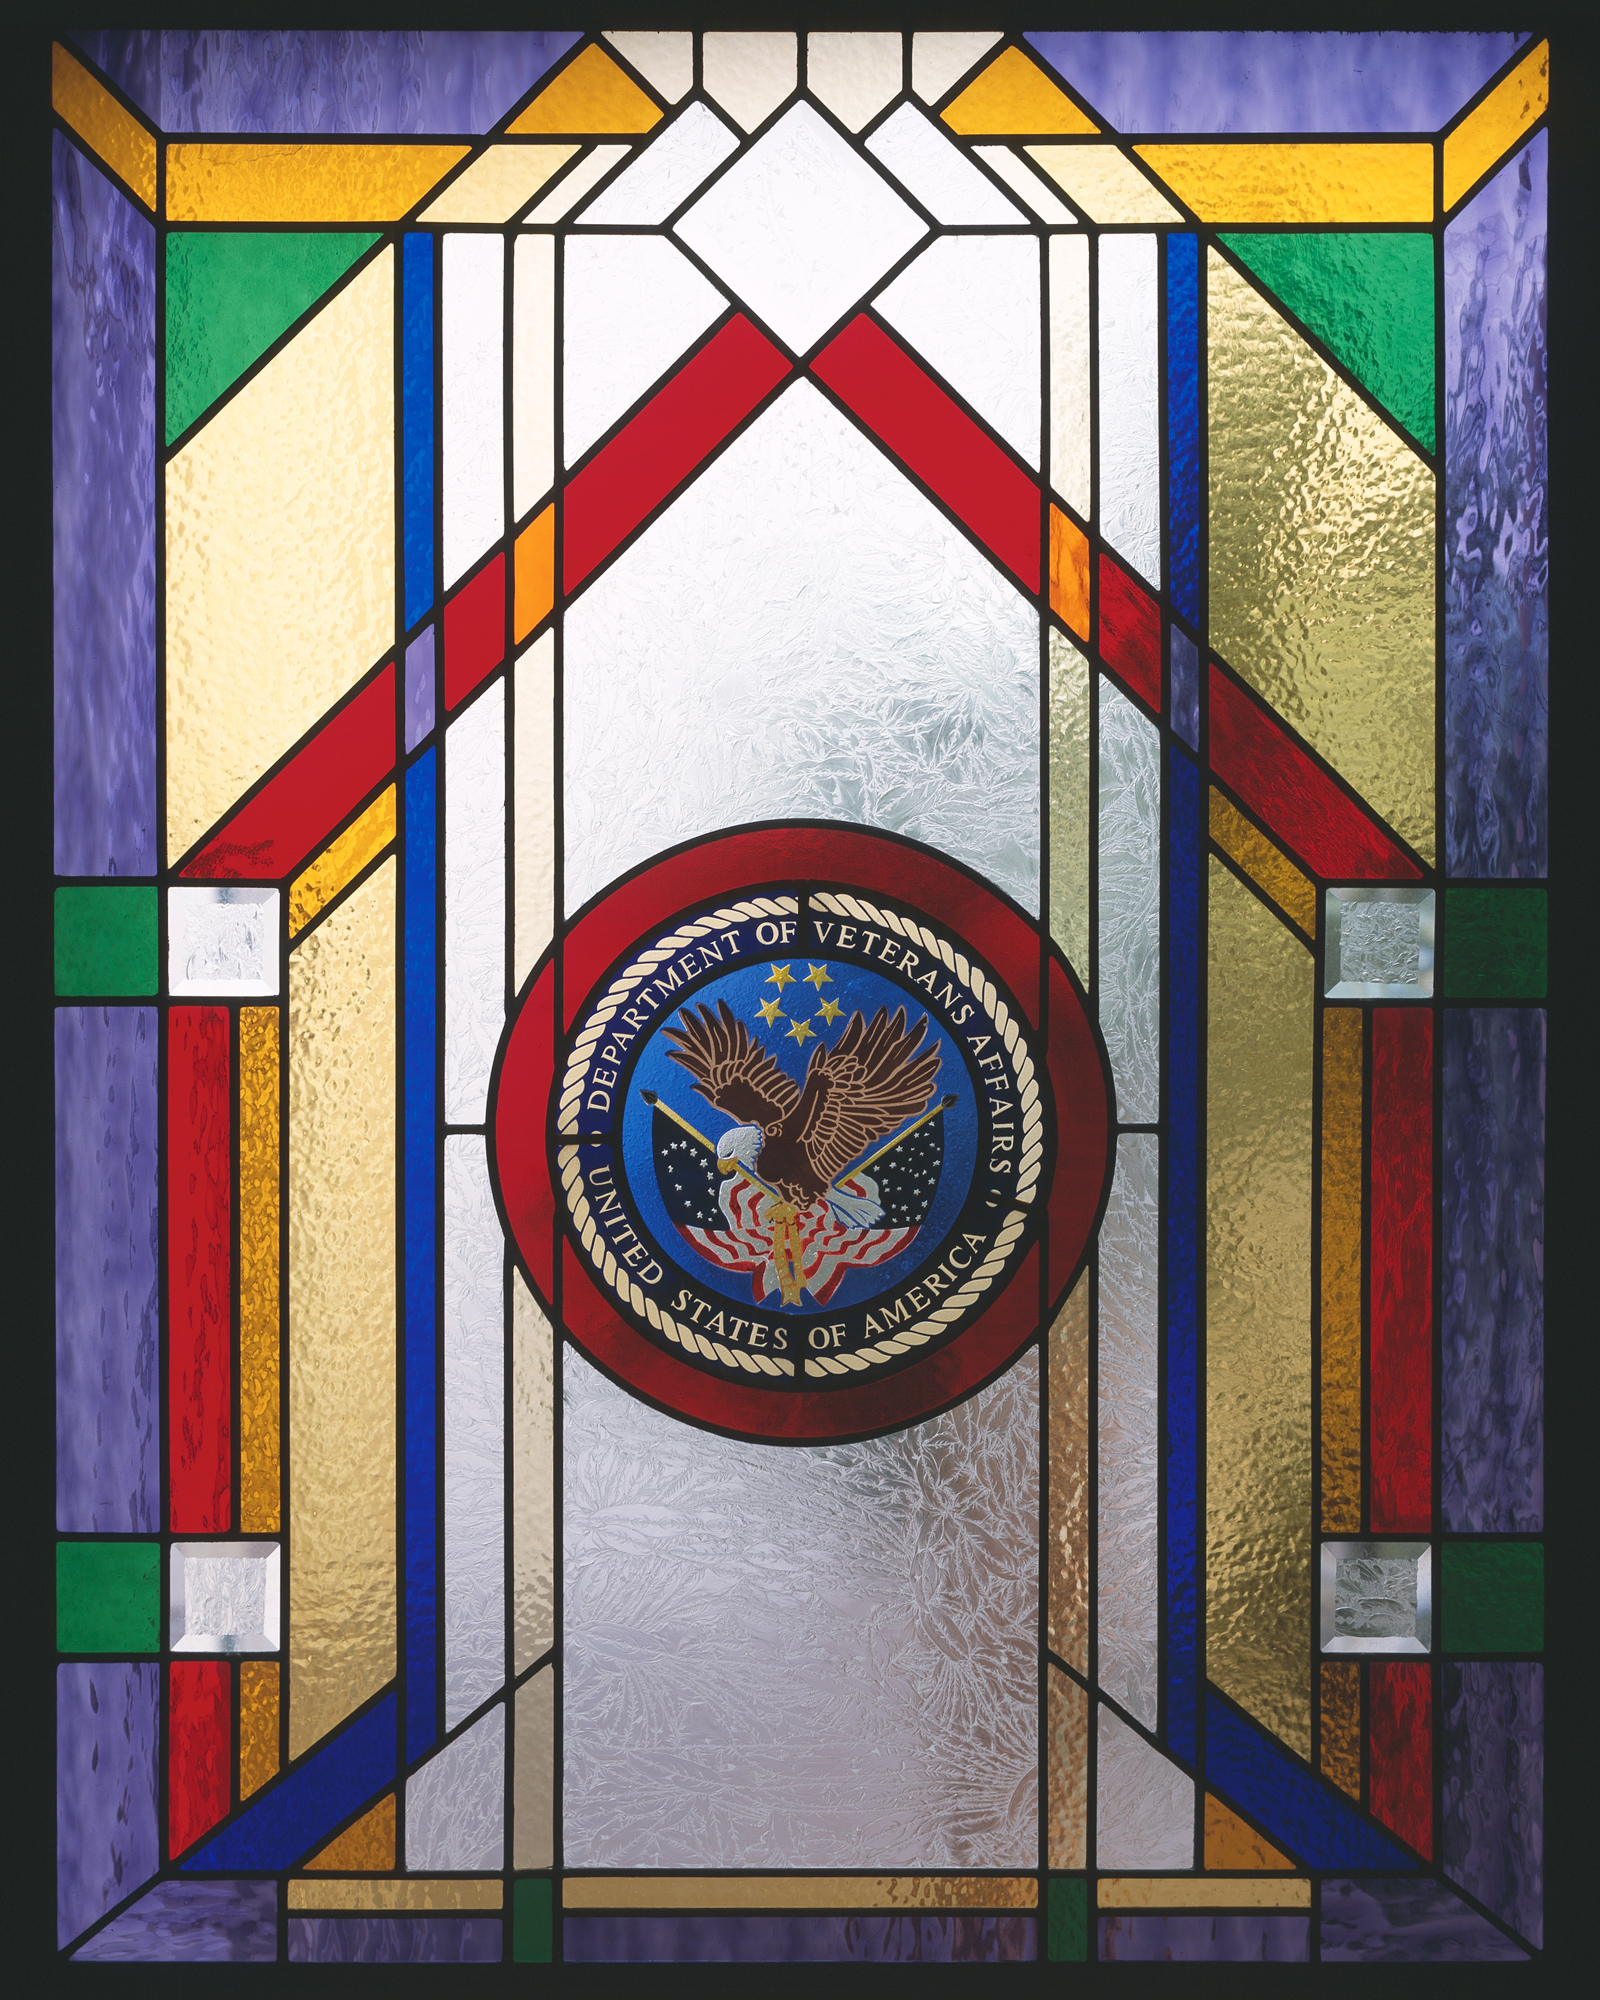 stained glass window with purple, red, green, amber and clear glass with veteran emblem in center